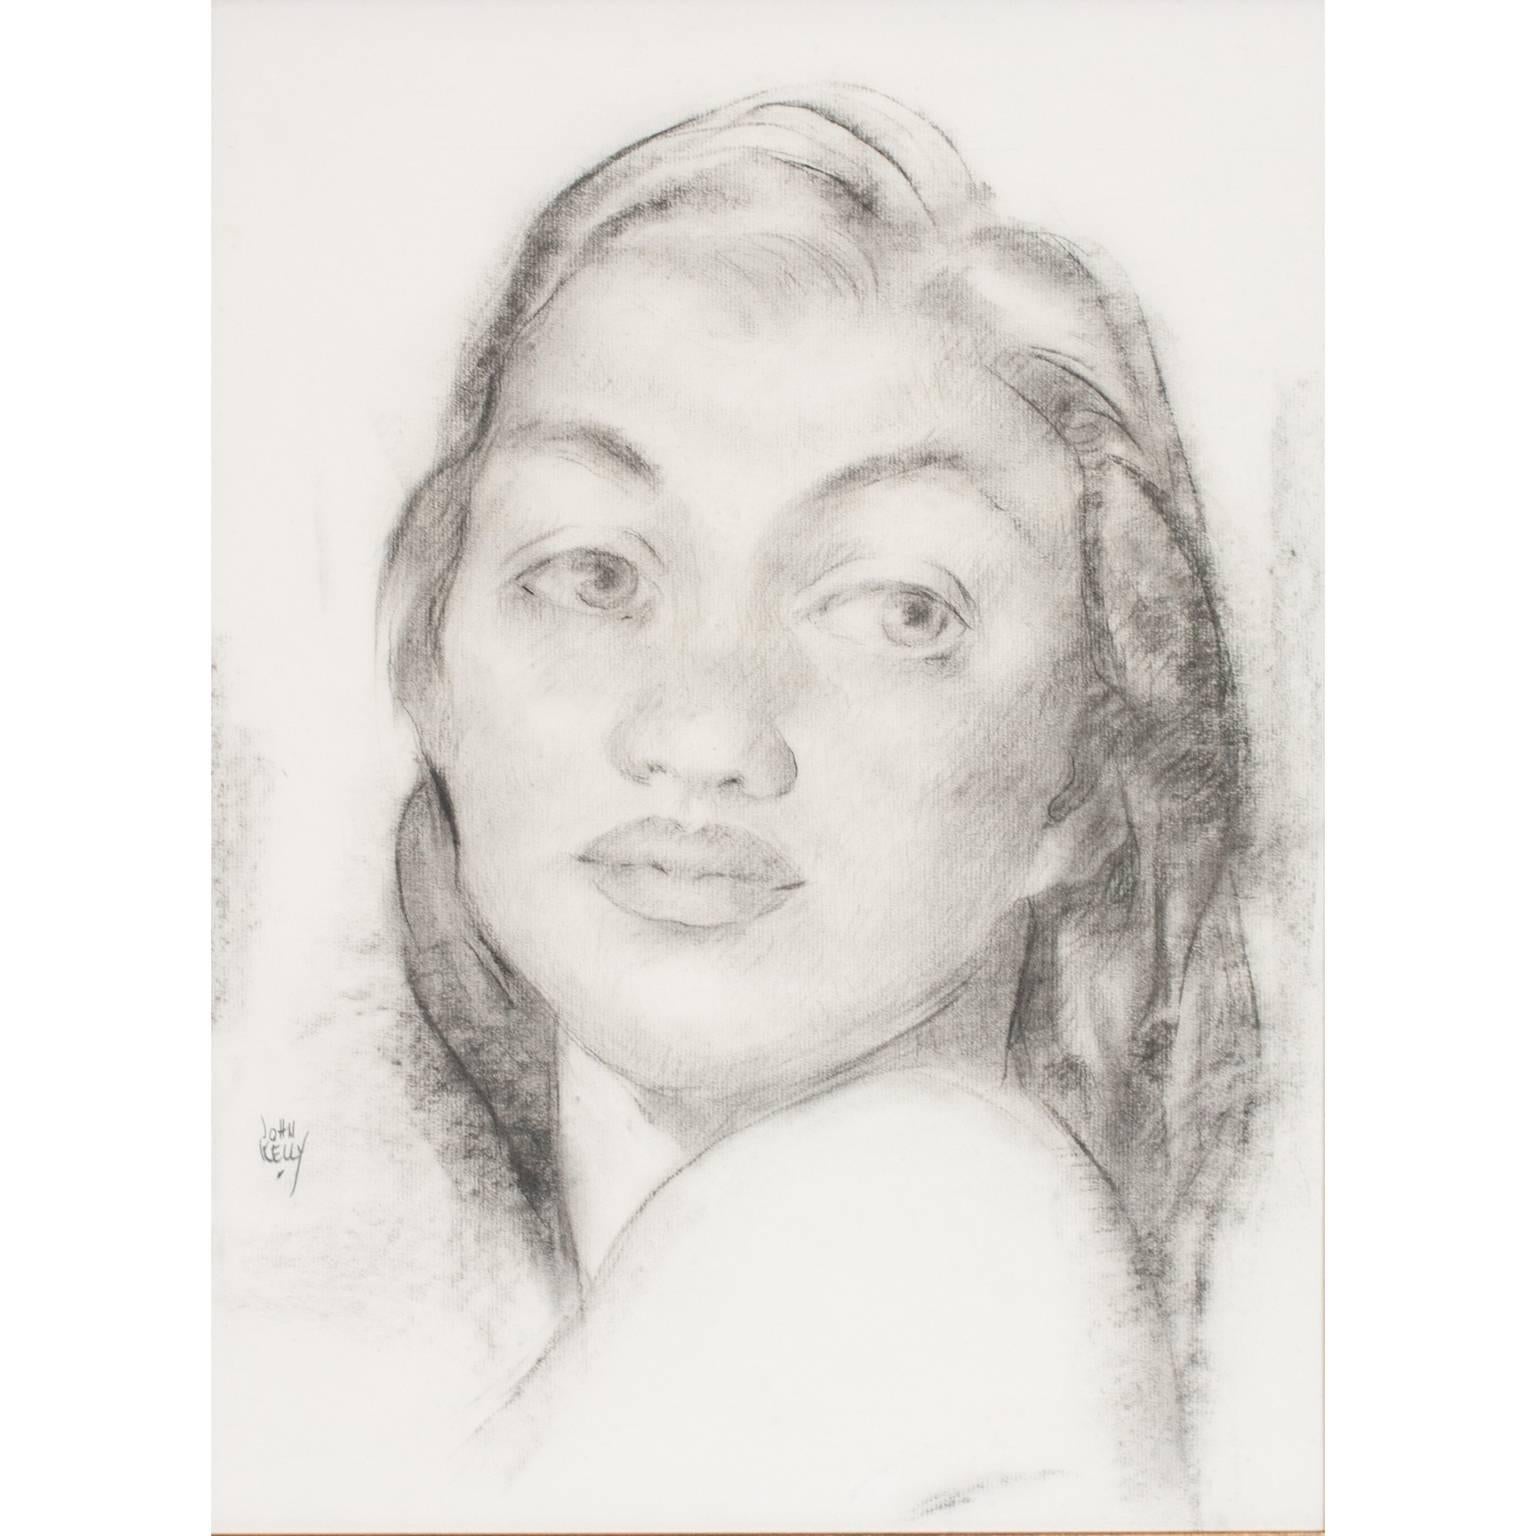 Original portrait done in charcoal on paper. Signed by the artist within the portrait.  This drawing was reproduced as the jacket cover for the 1943 book, Etchings and Drawings of Hawaiians.  The model was his own daughter-in-law, Marion.  It is